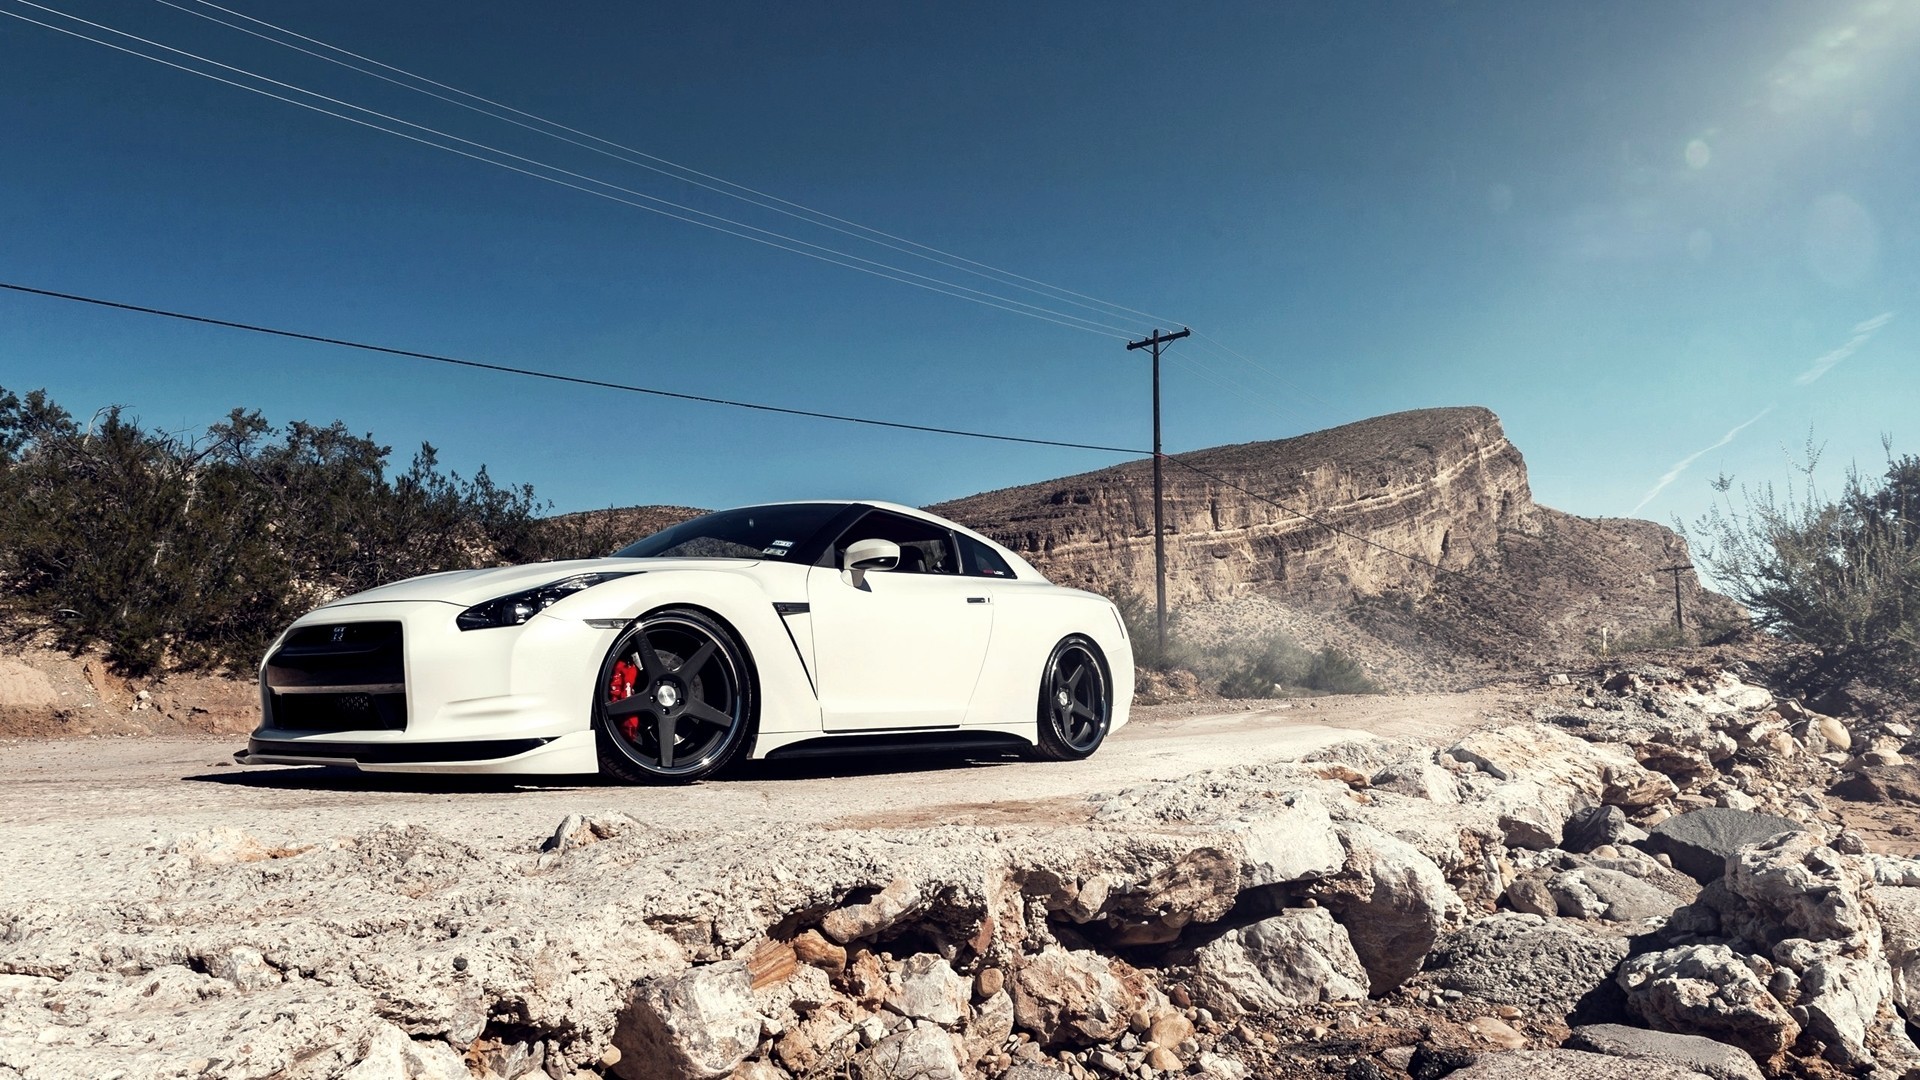 General 1920x1080 Nissan GT-R car vehicle outdoors Nissan white cars power lines